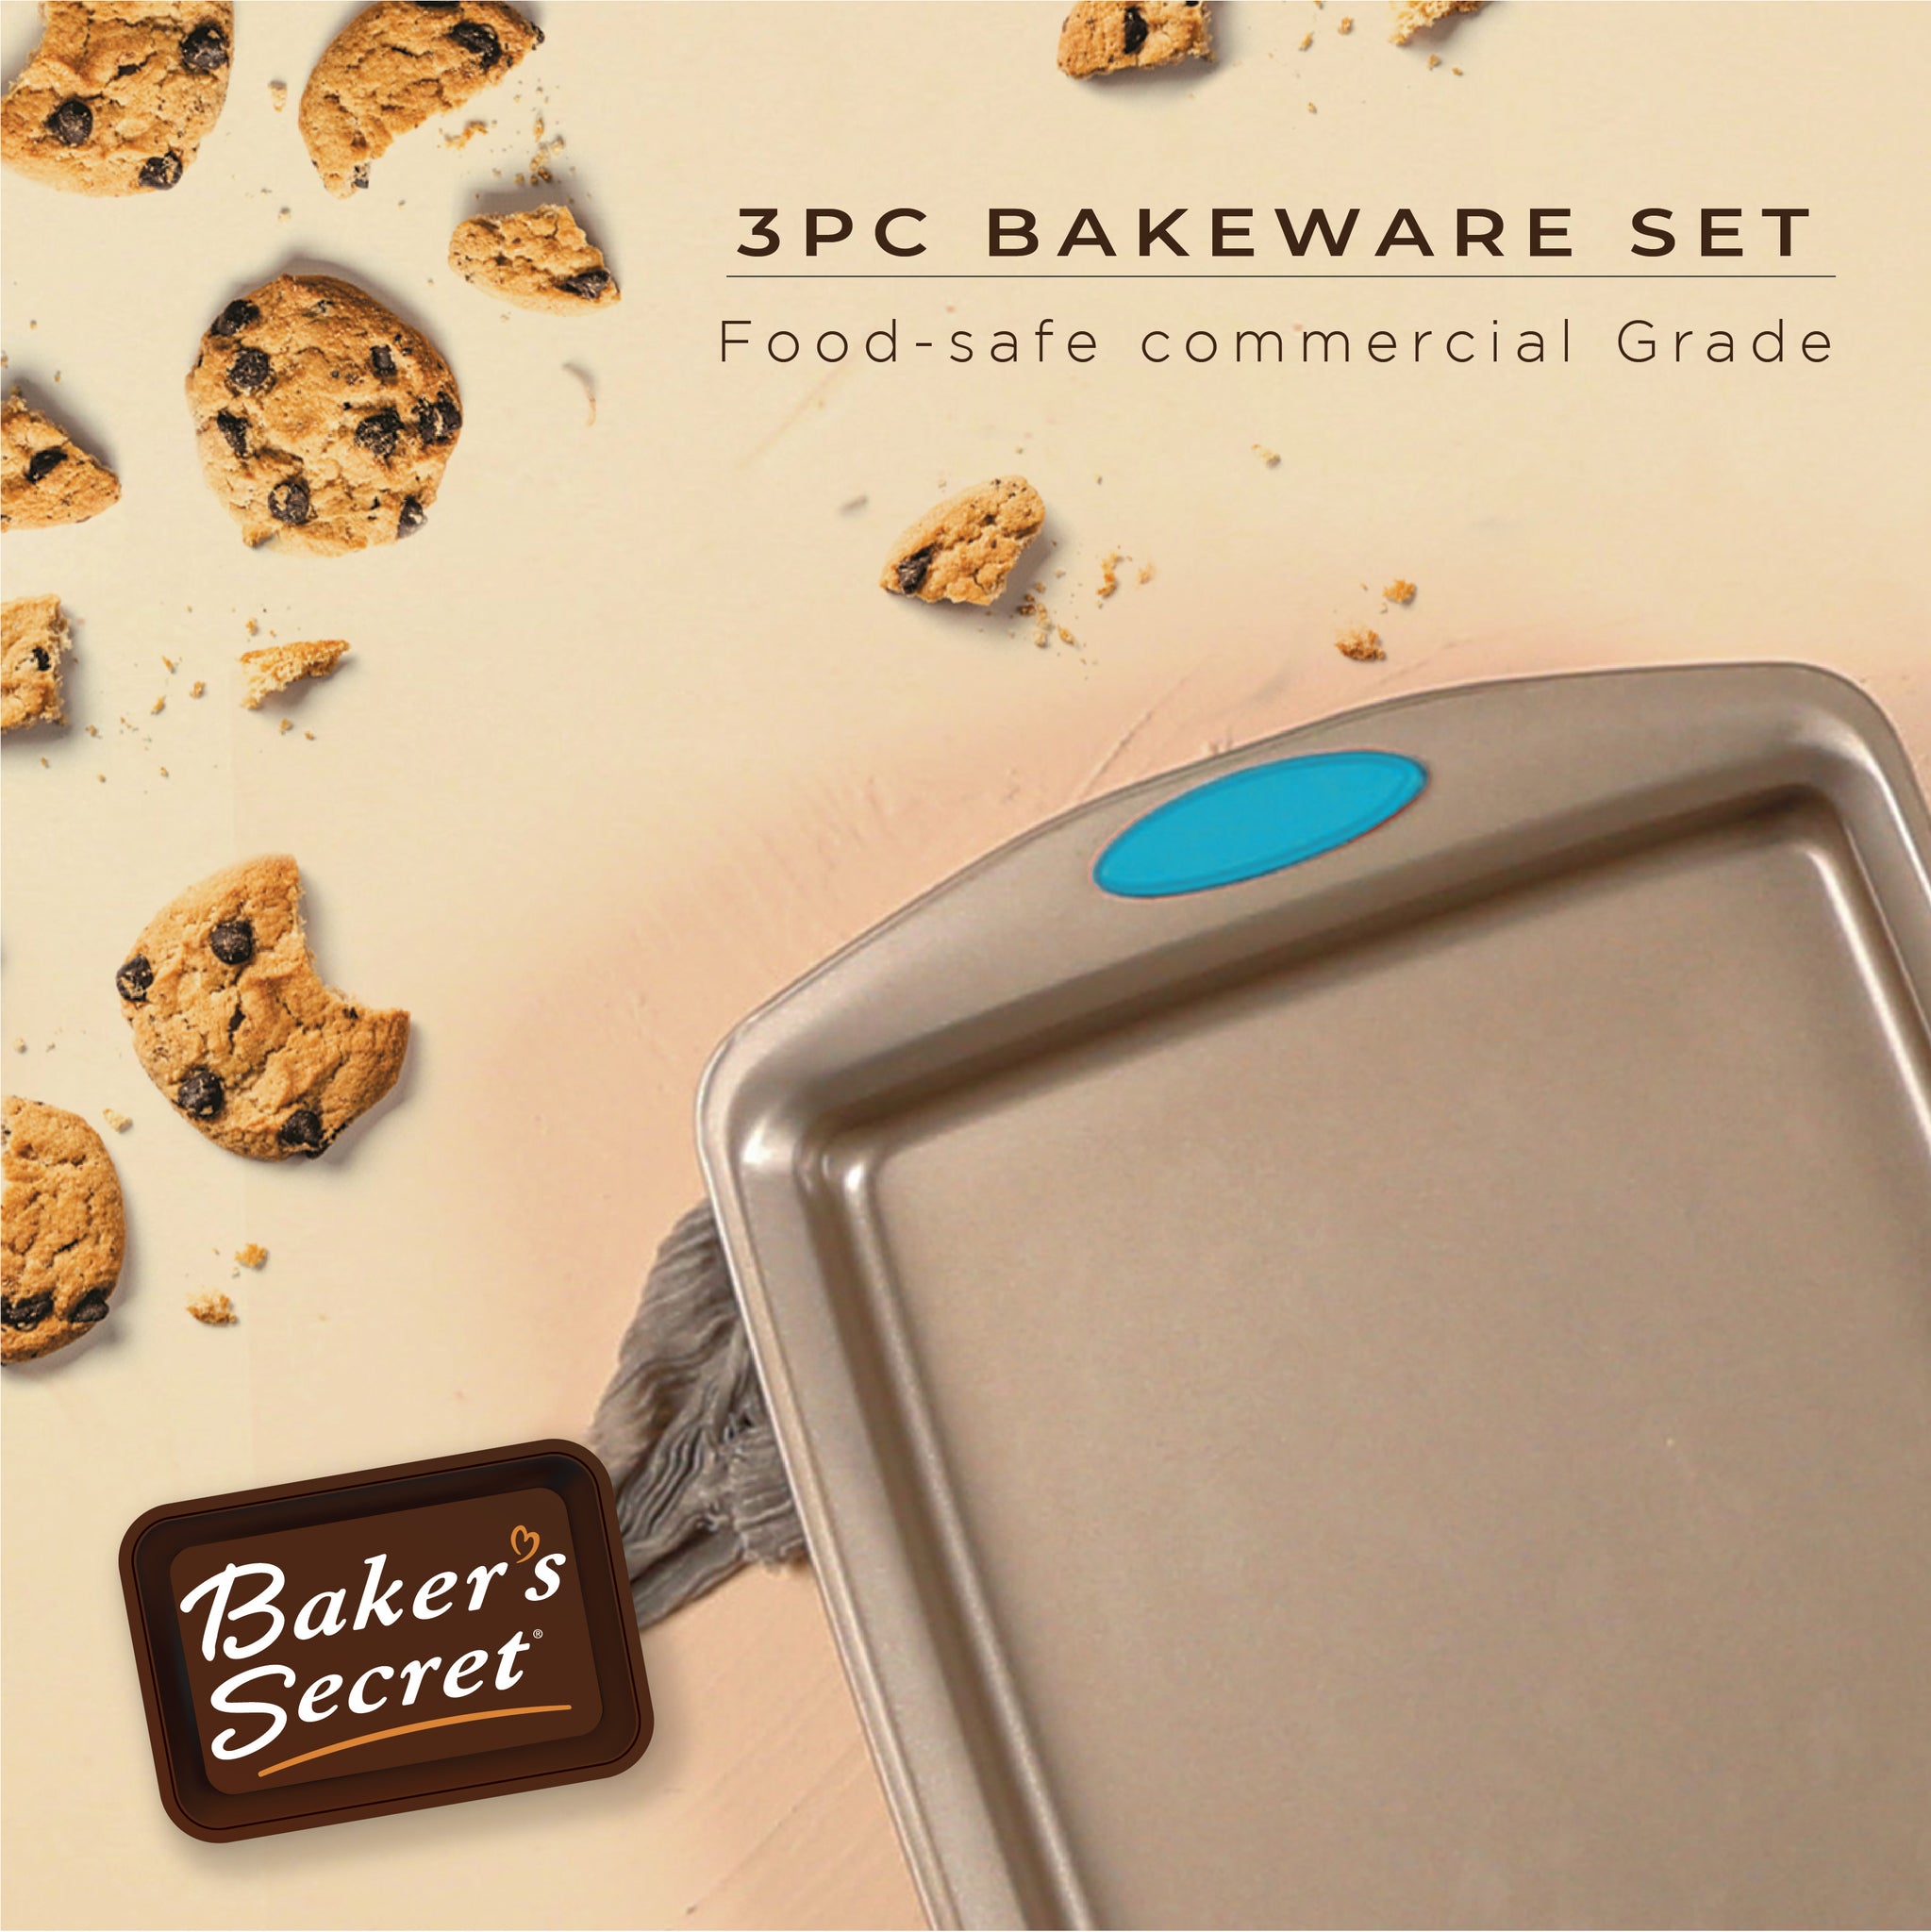 Baker's Secret Set of 3 Cookie Sheets, 15 17 19, Nonstick Coating for  Easy Release, Cookie Trays for Baking Roasting Cooking, Dishwasher Safe DIY  Home Baking Supplies - Essentials Collection